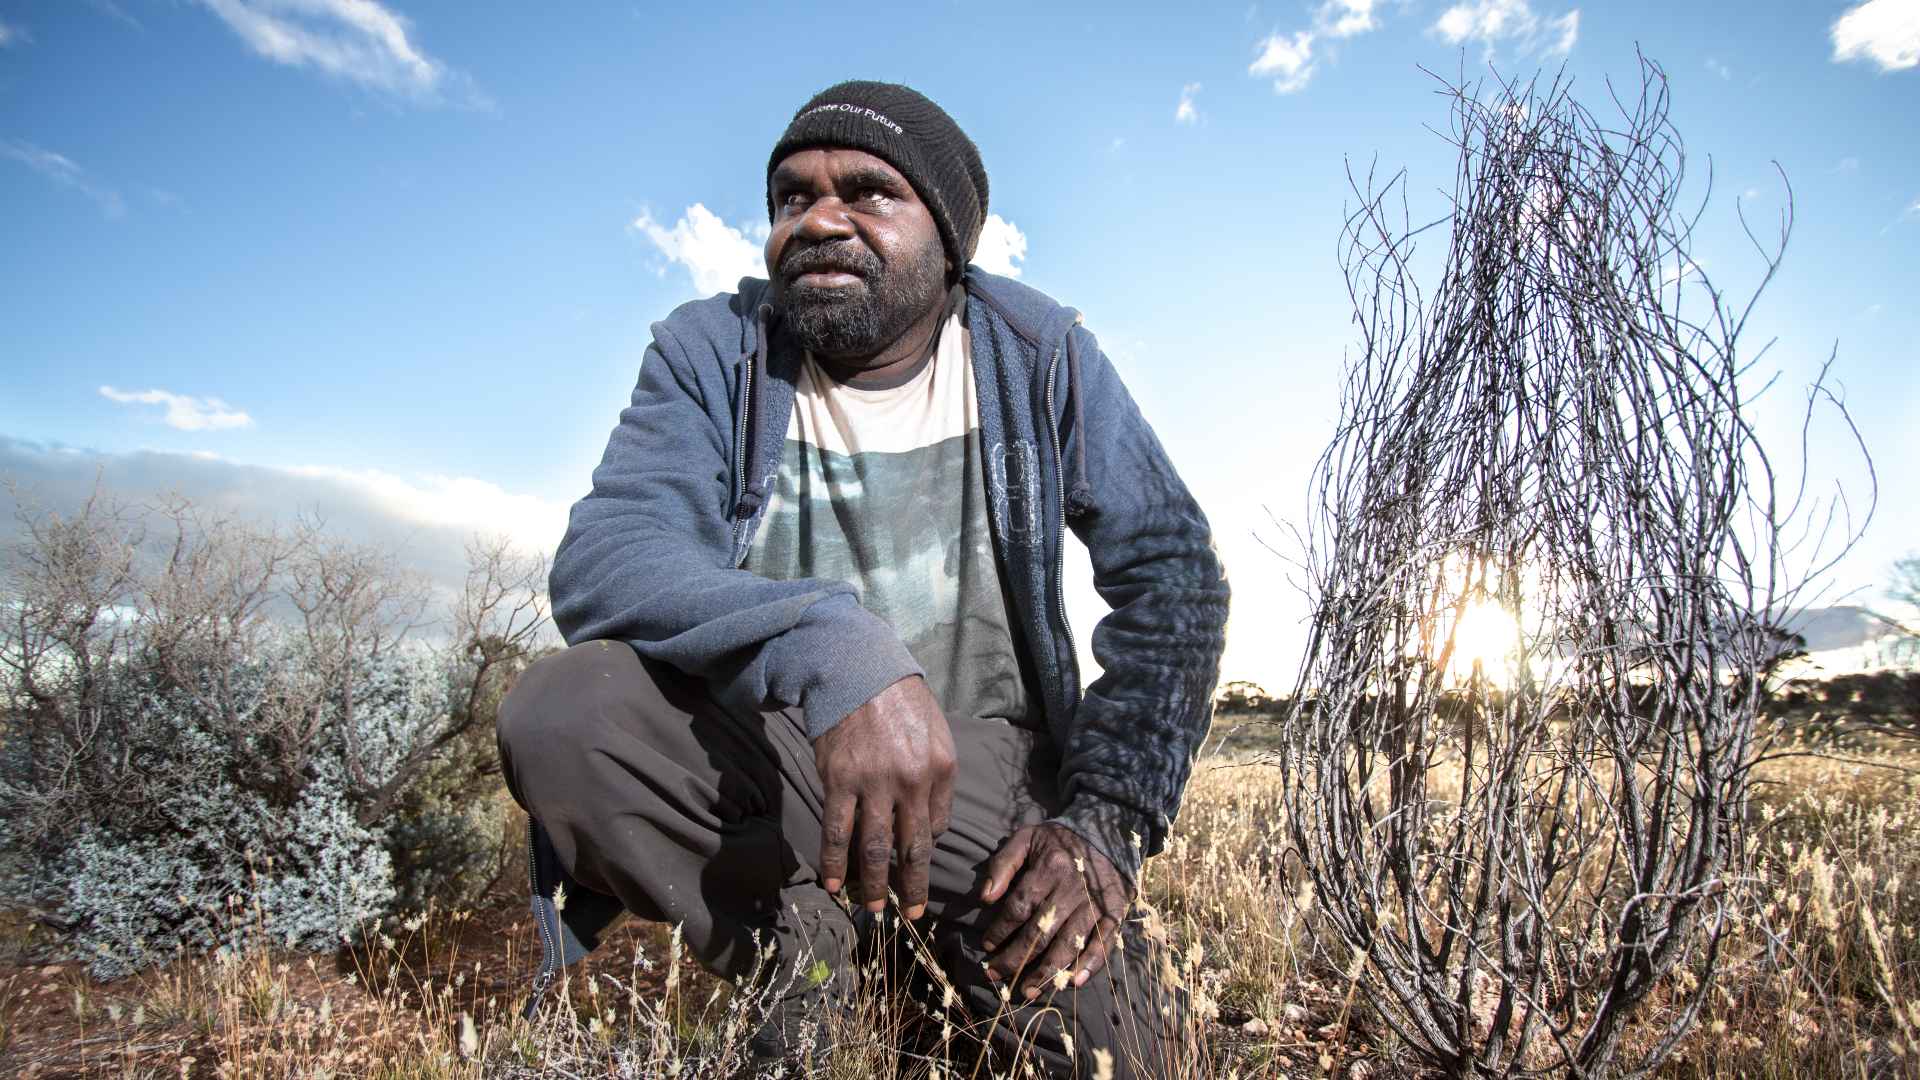 Meet the Seven Winners of This Year's Telstra National Aboriginal and Torres Strait Islander Art Awards